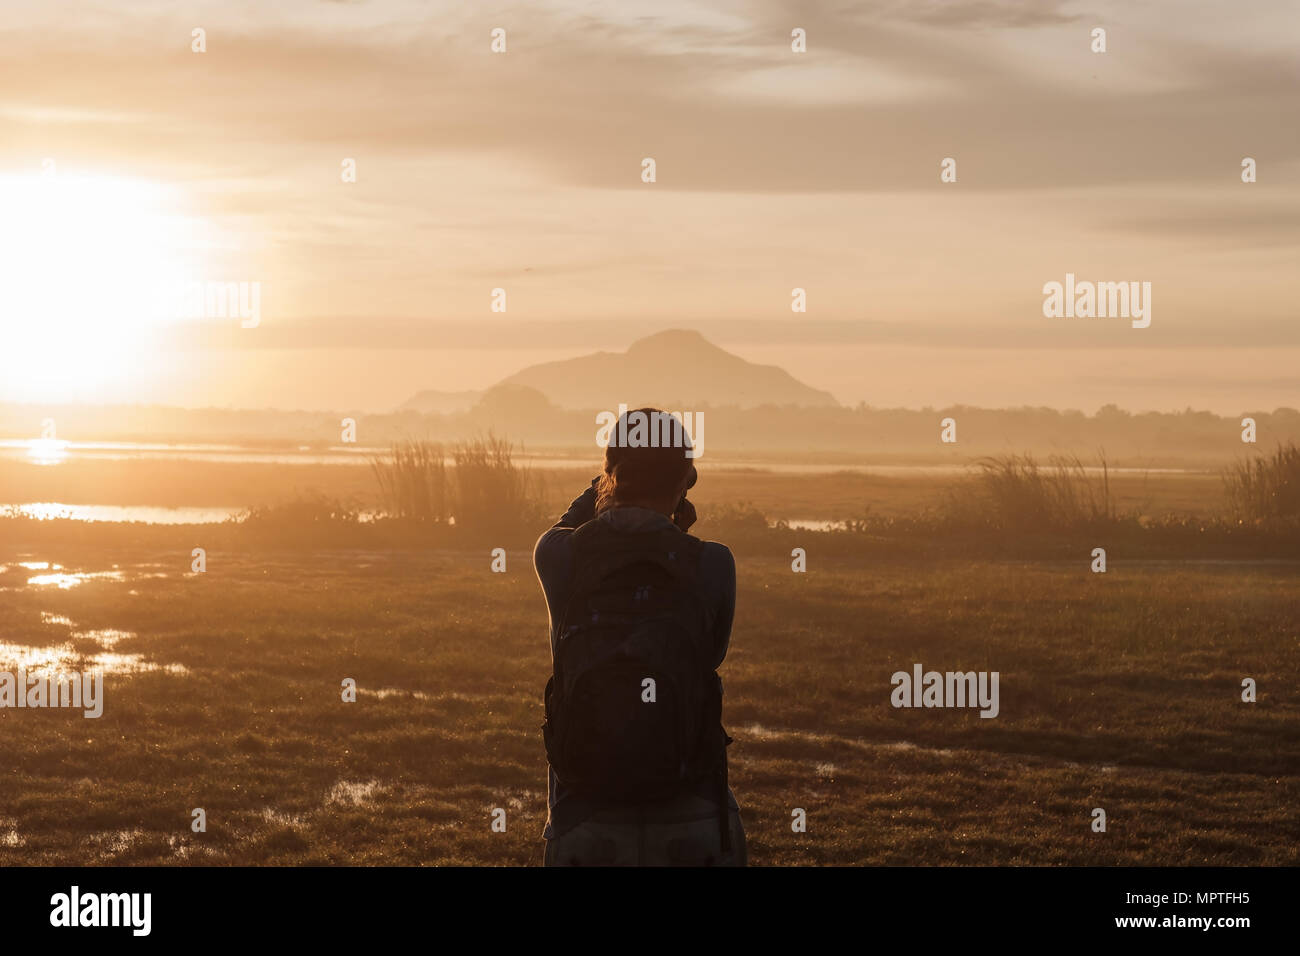 silhouette of a woman holding a smartphone taking pictures outside during sunrise or sunset. Stock Photo